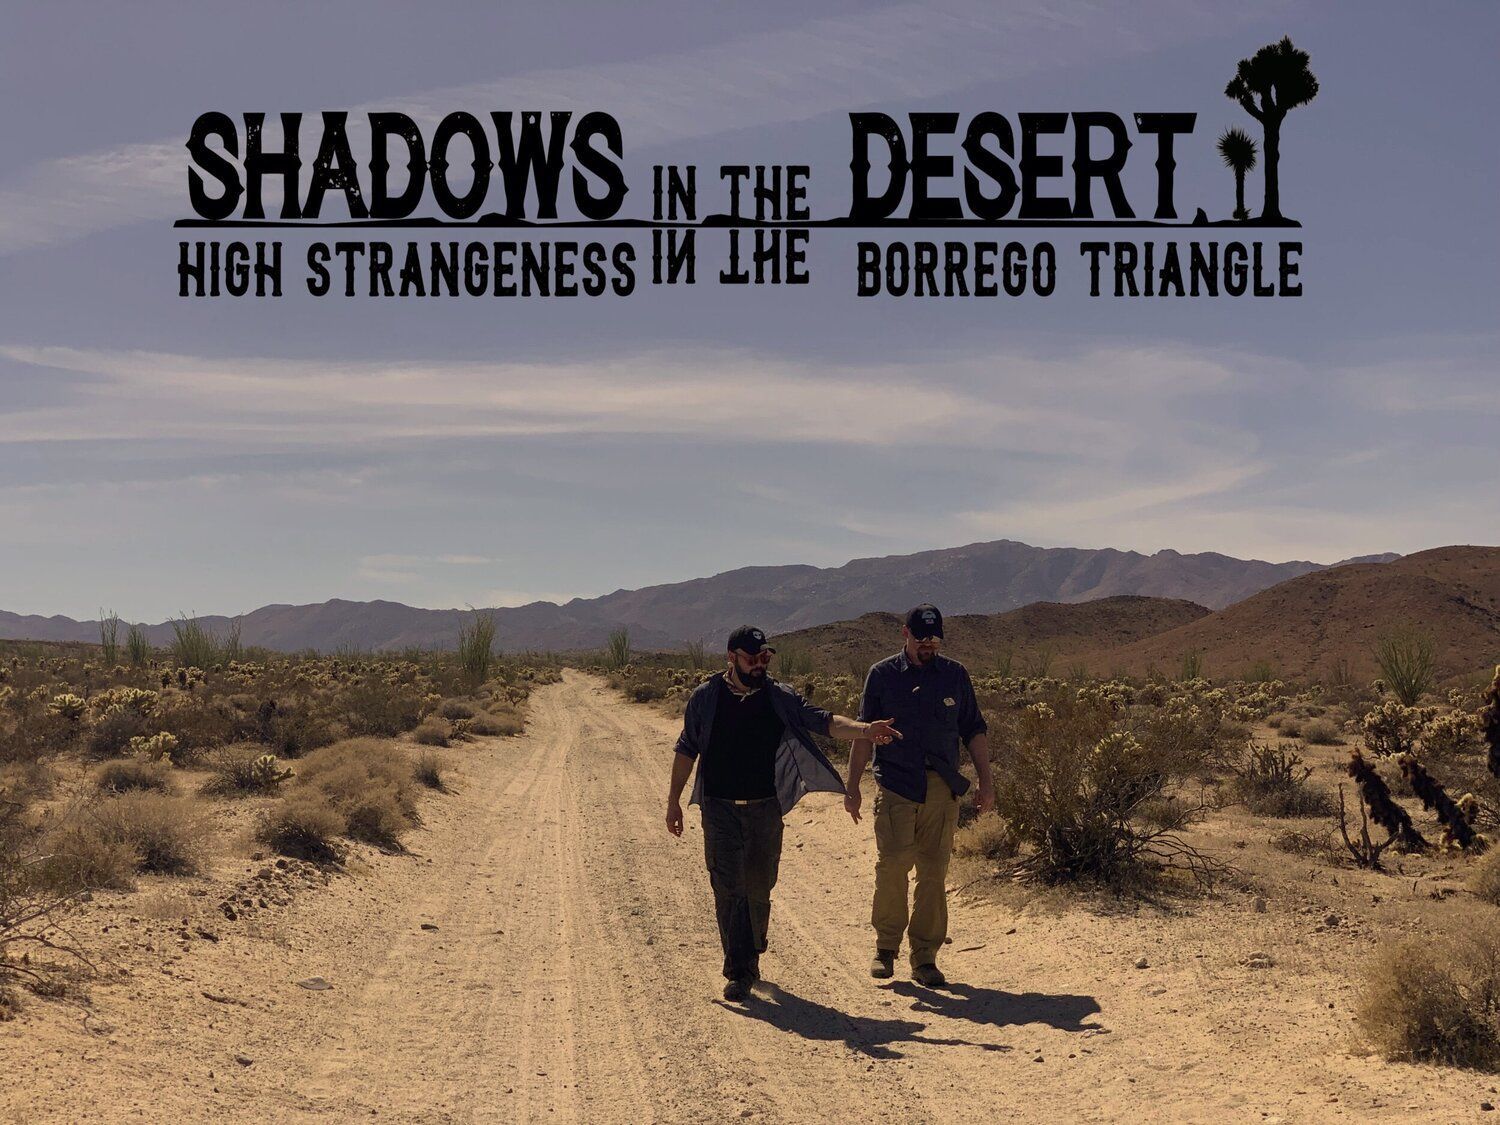 Shadows in the Desert: High Strangeness in the Borrego Triangle